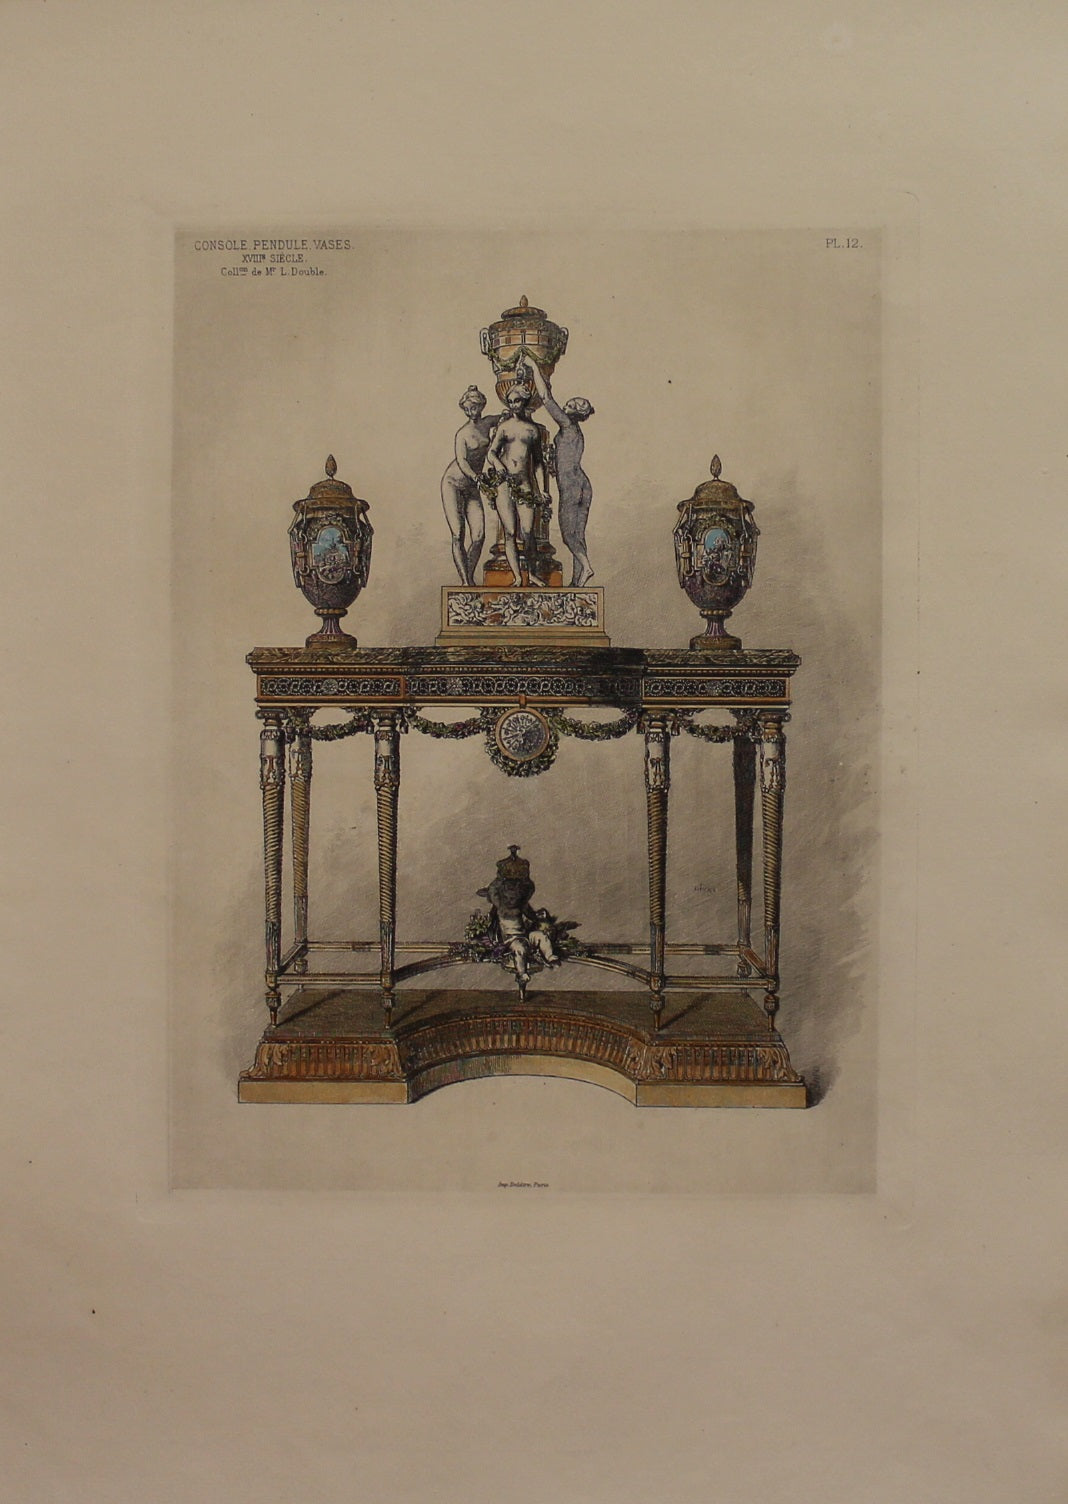 Decorator, Furniture, Console Pendule Vases, XVII Siecle, From the Collection M L. Double, Plate 12, 1864